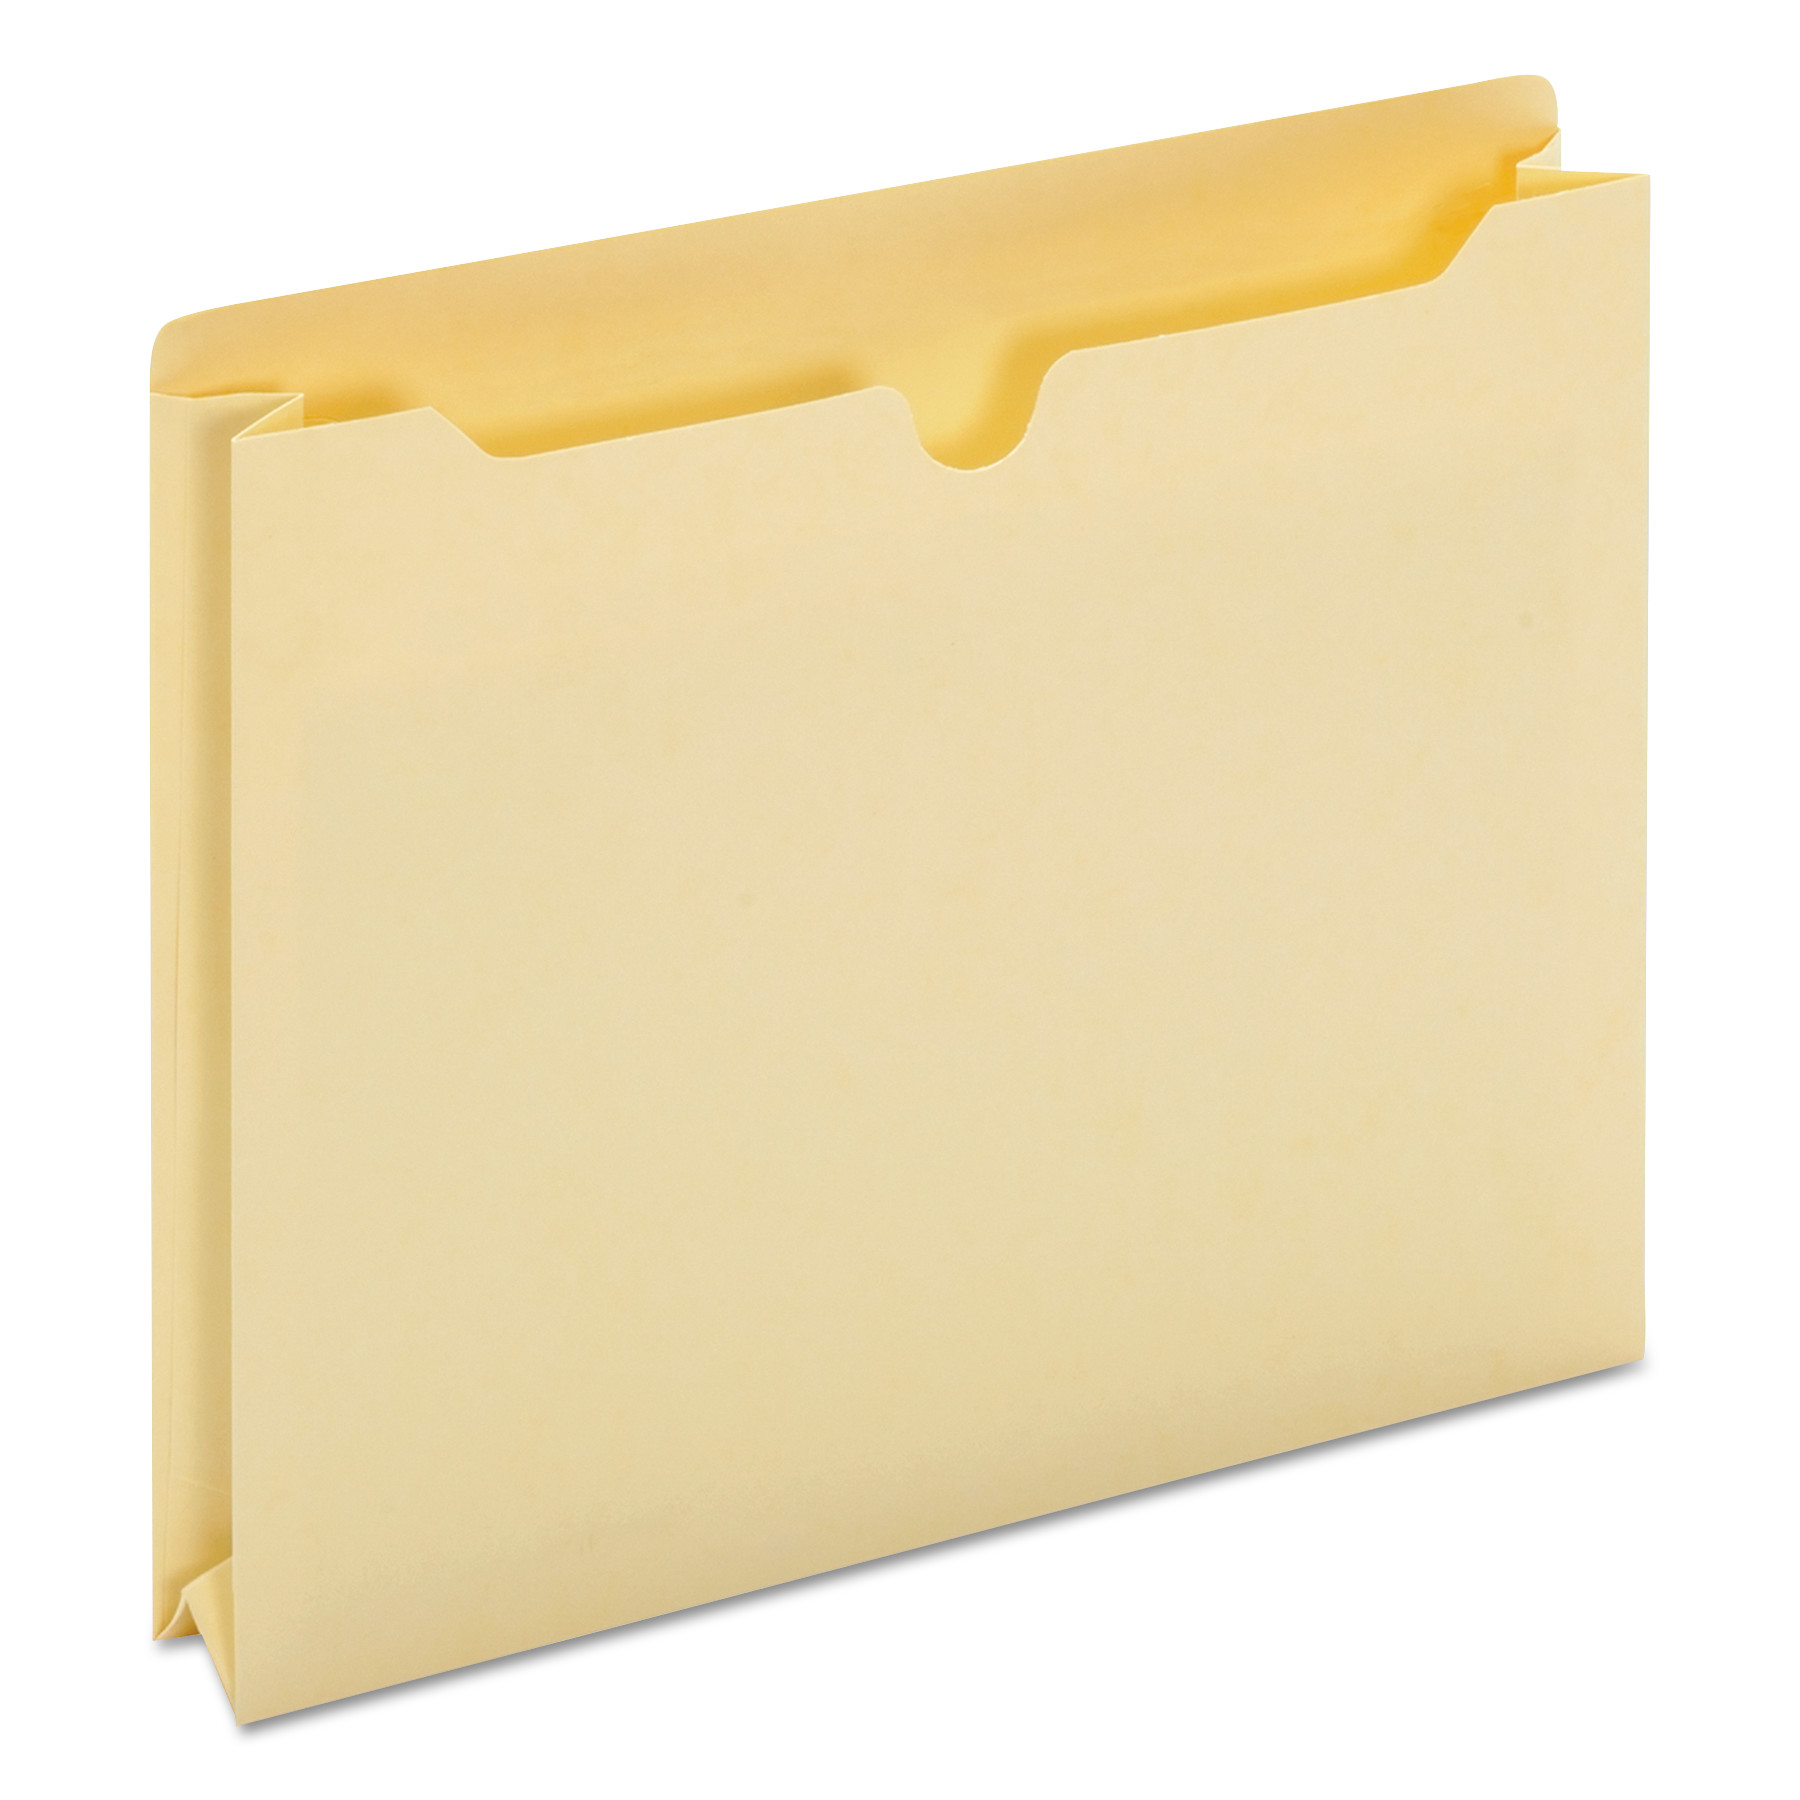 UNV76500 Economical File Jackets with Two Inch Expansion 